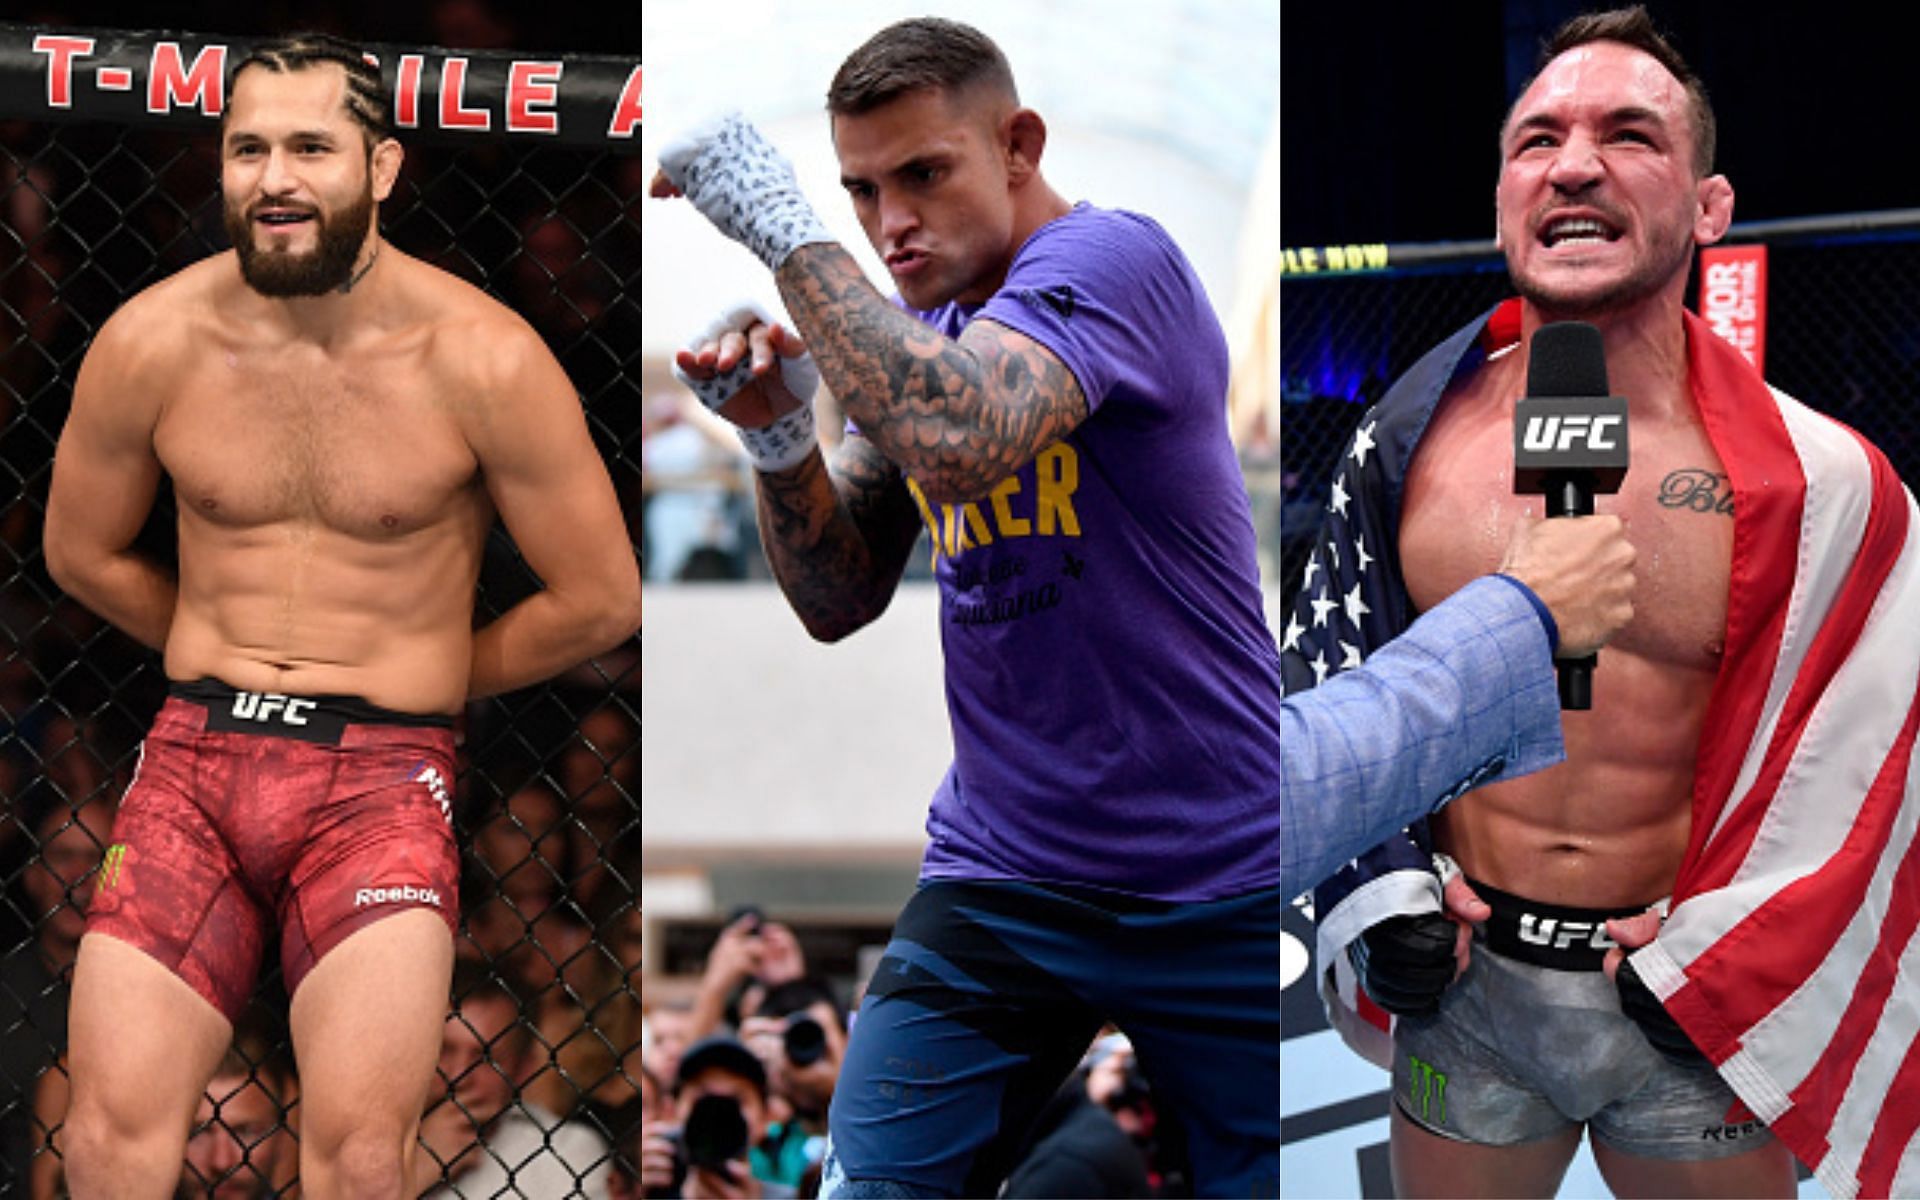 Jorge Masvidal (left), Dustin Poirier (middle), and Michael Chandler (right)(Images via Getty)